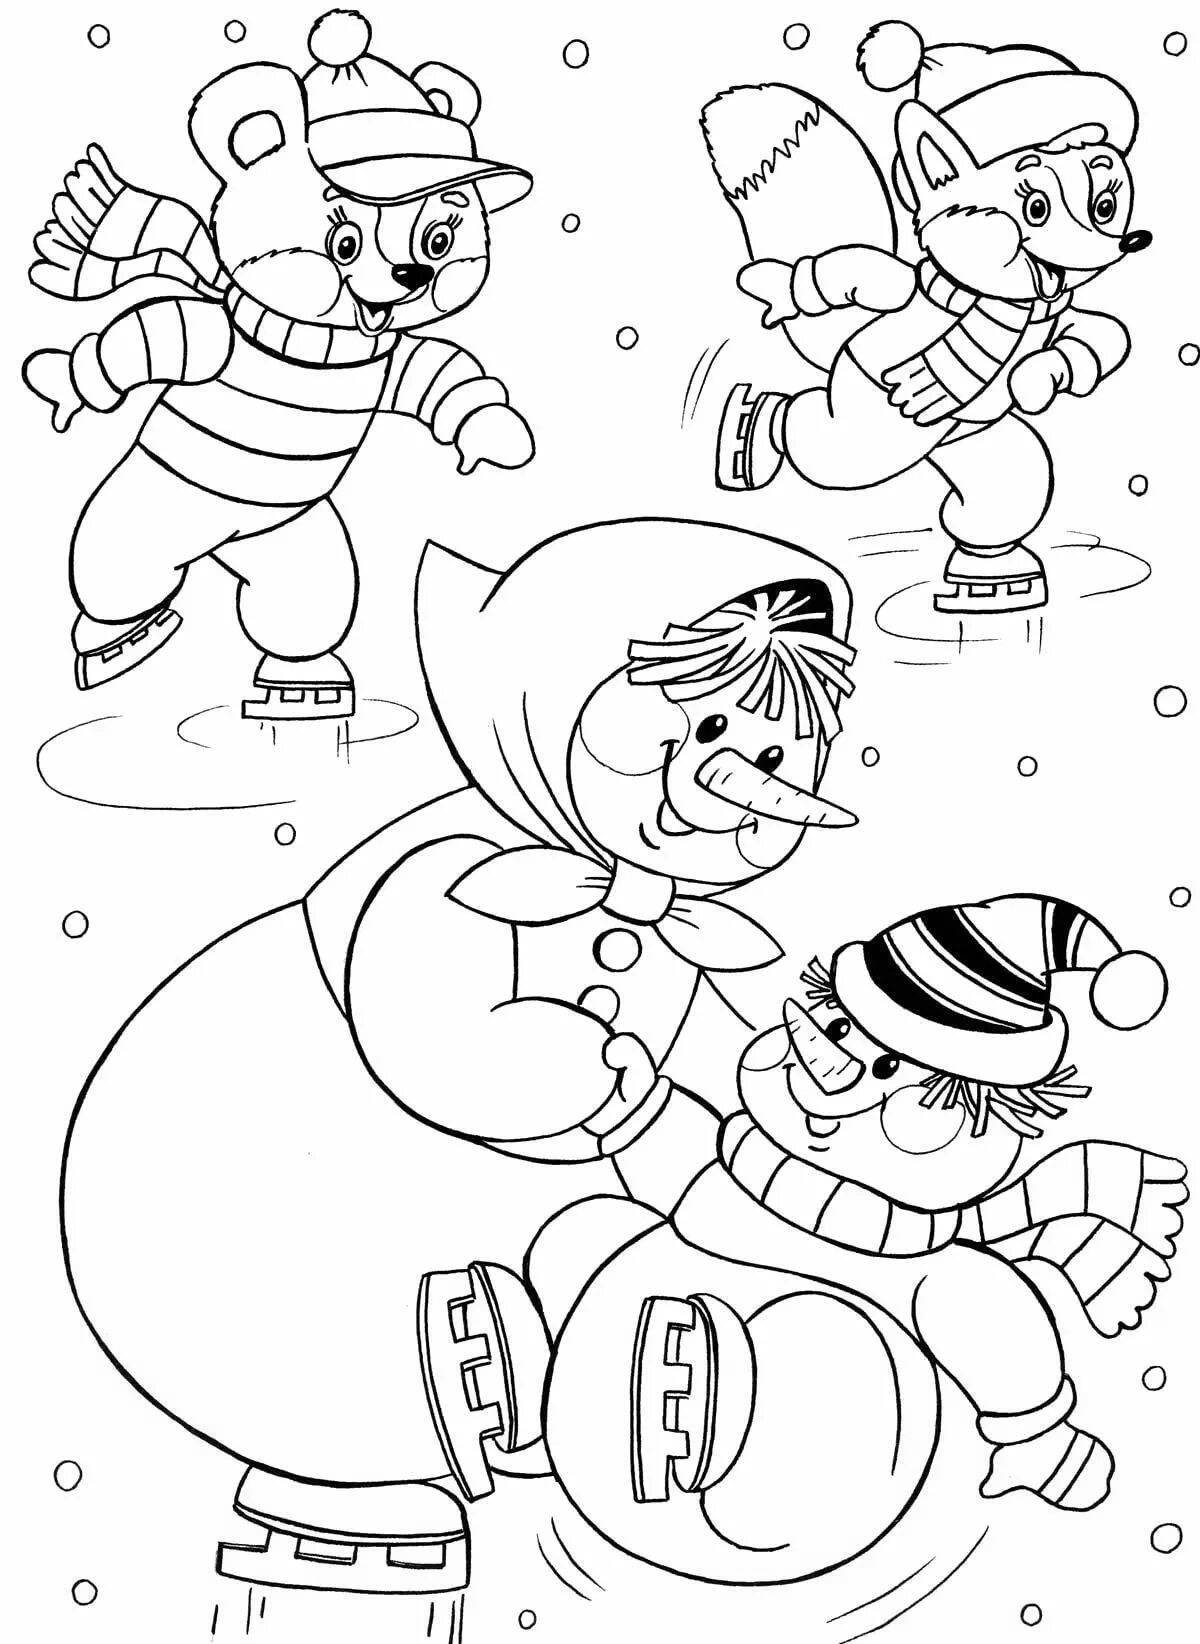 Large winter coloring book for children 4-5 years old